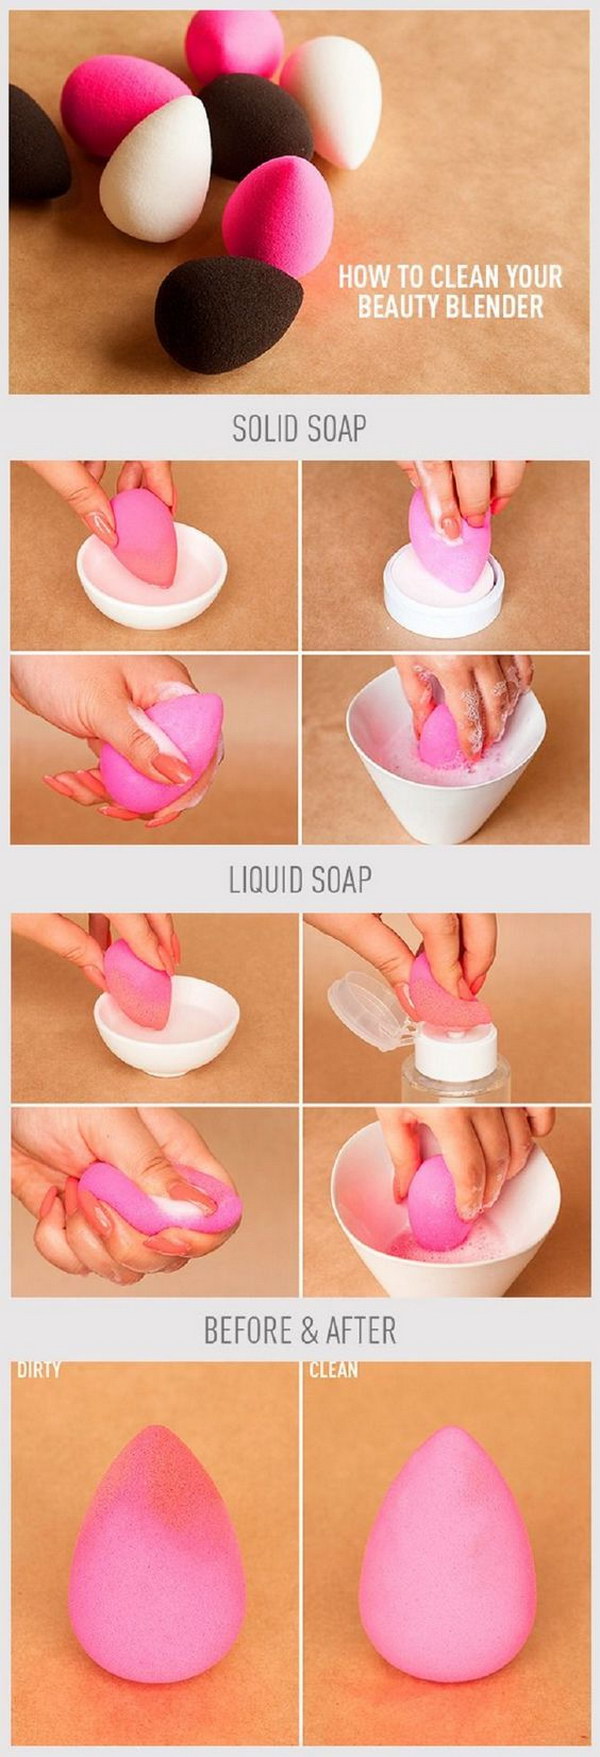 How to Clean Makeup Sponges. 